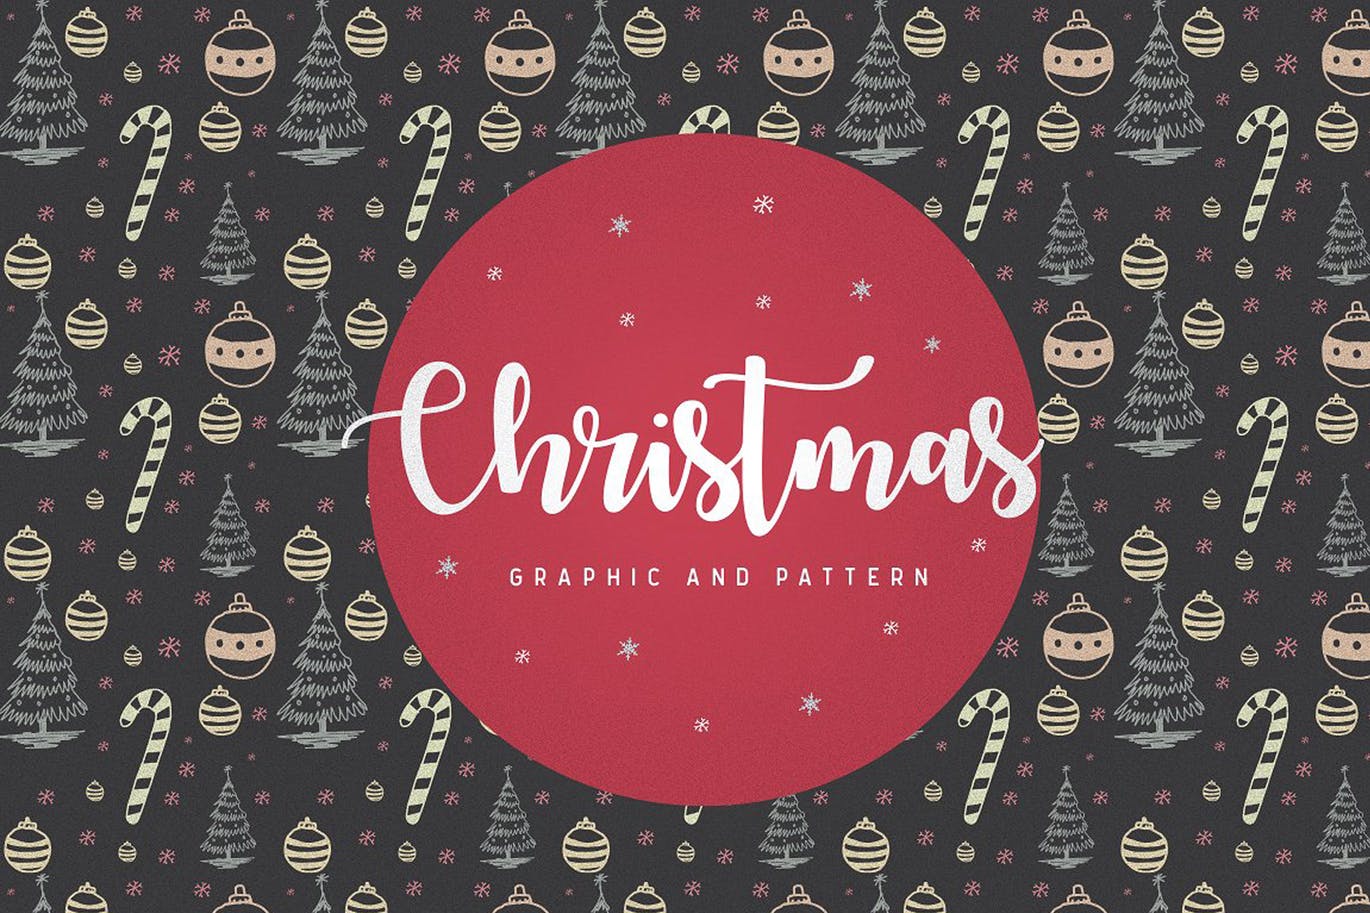 Christmas patterns and graphics collection